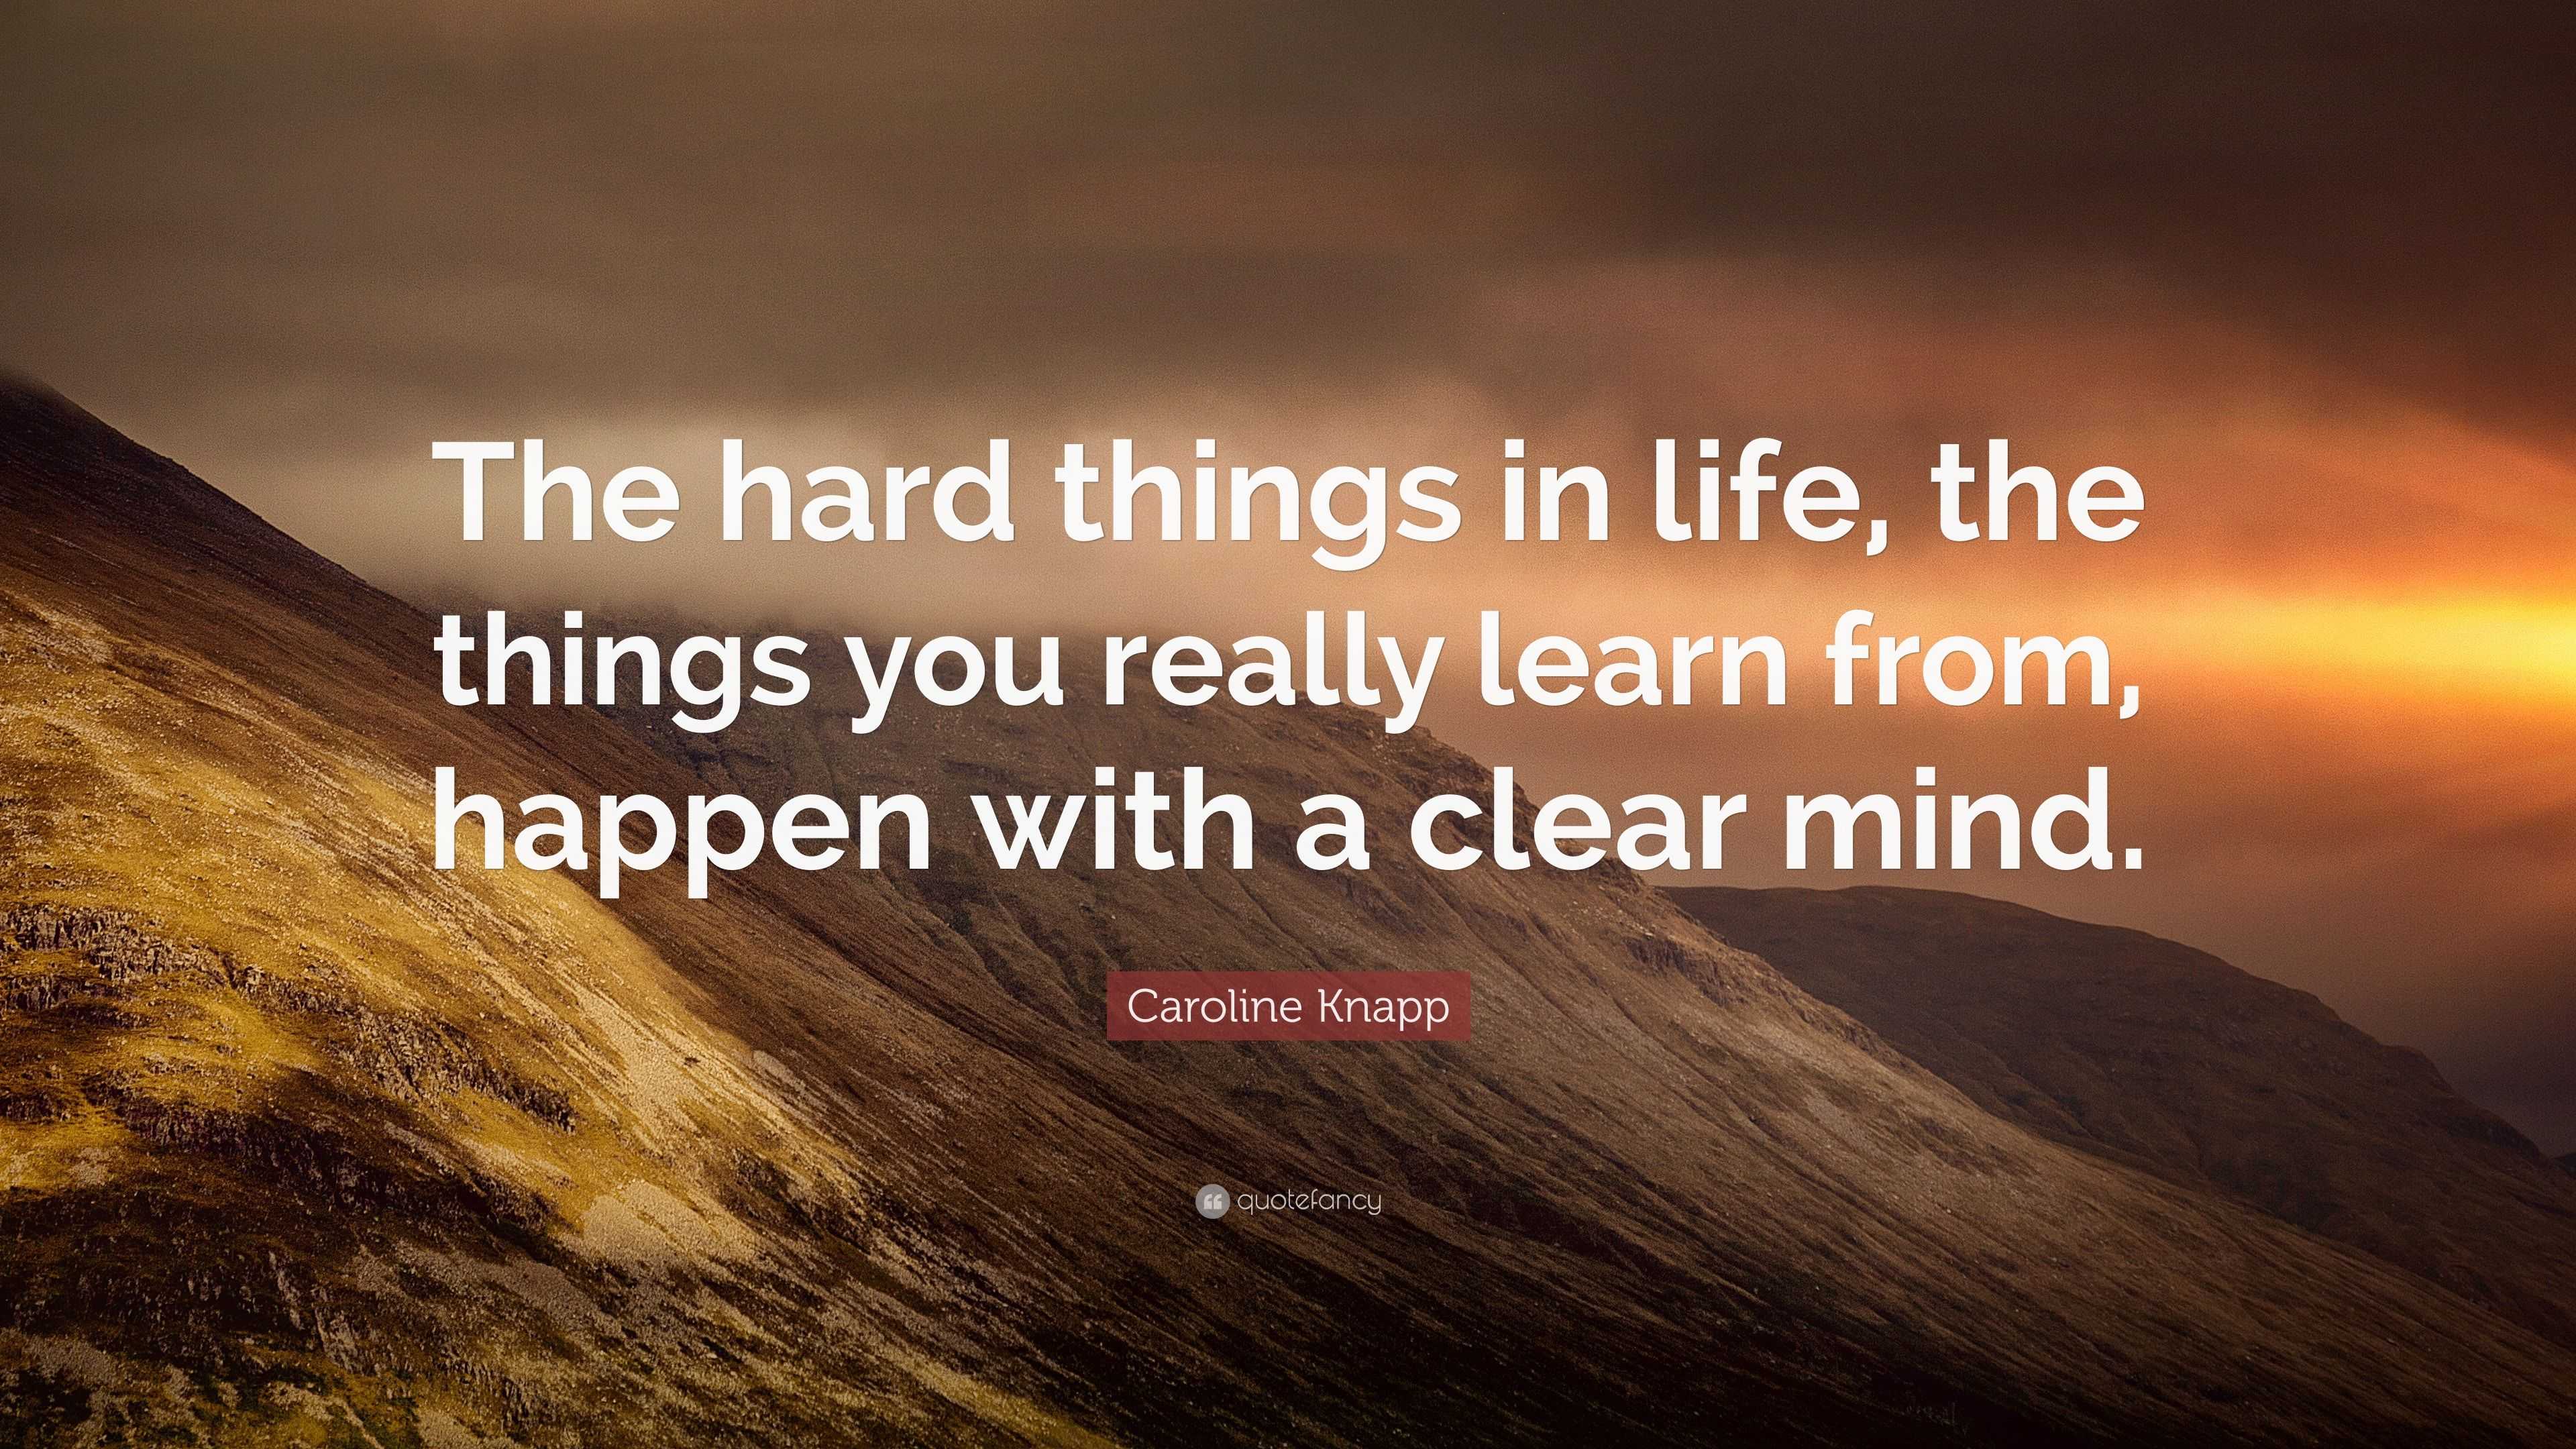 Caroline Knapp Quote “The hard things in life the things you really learn